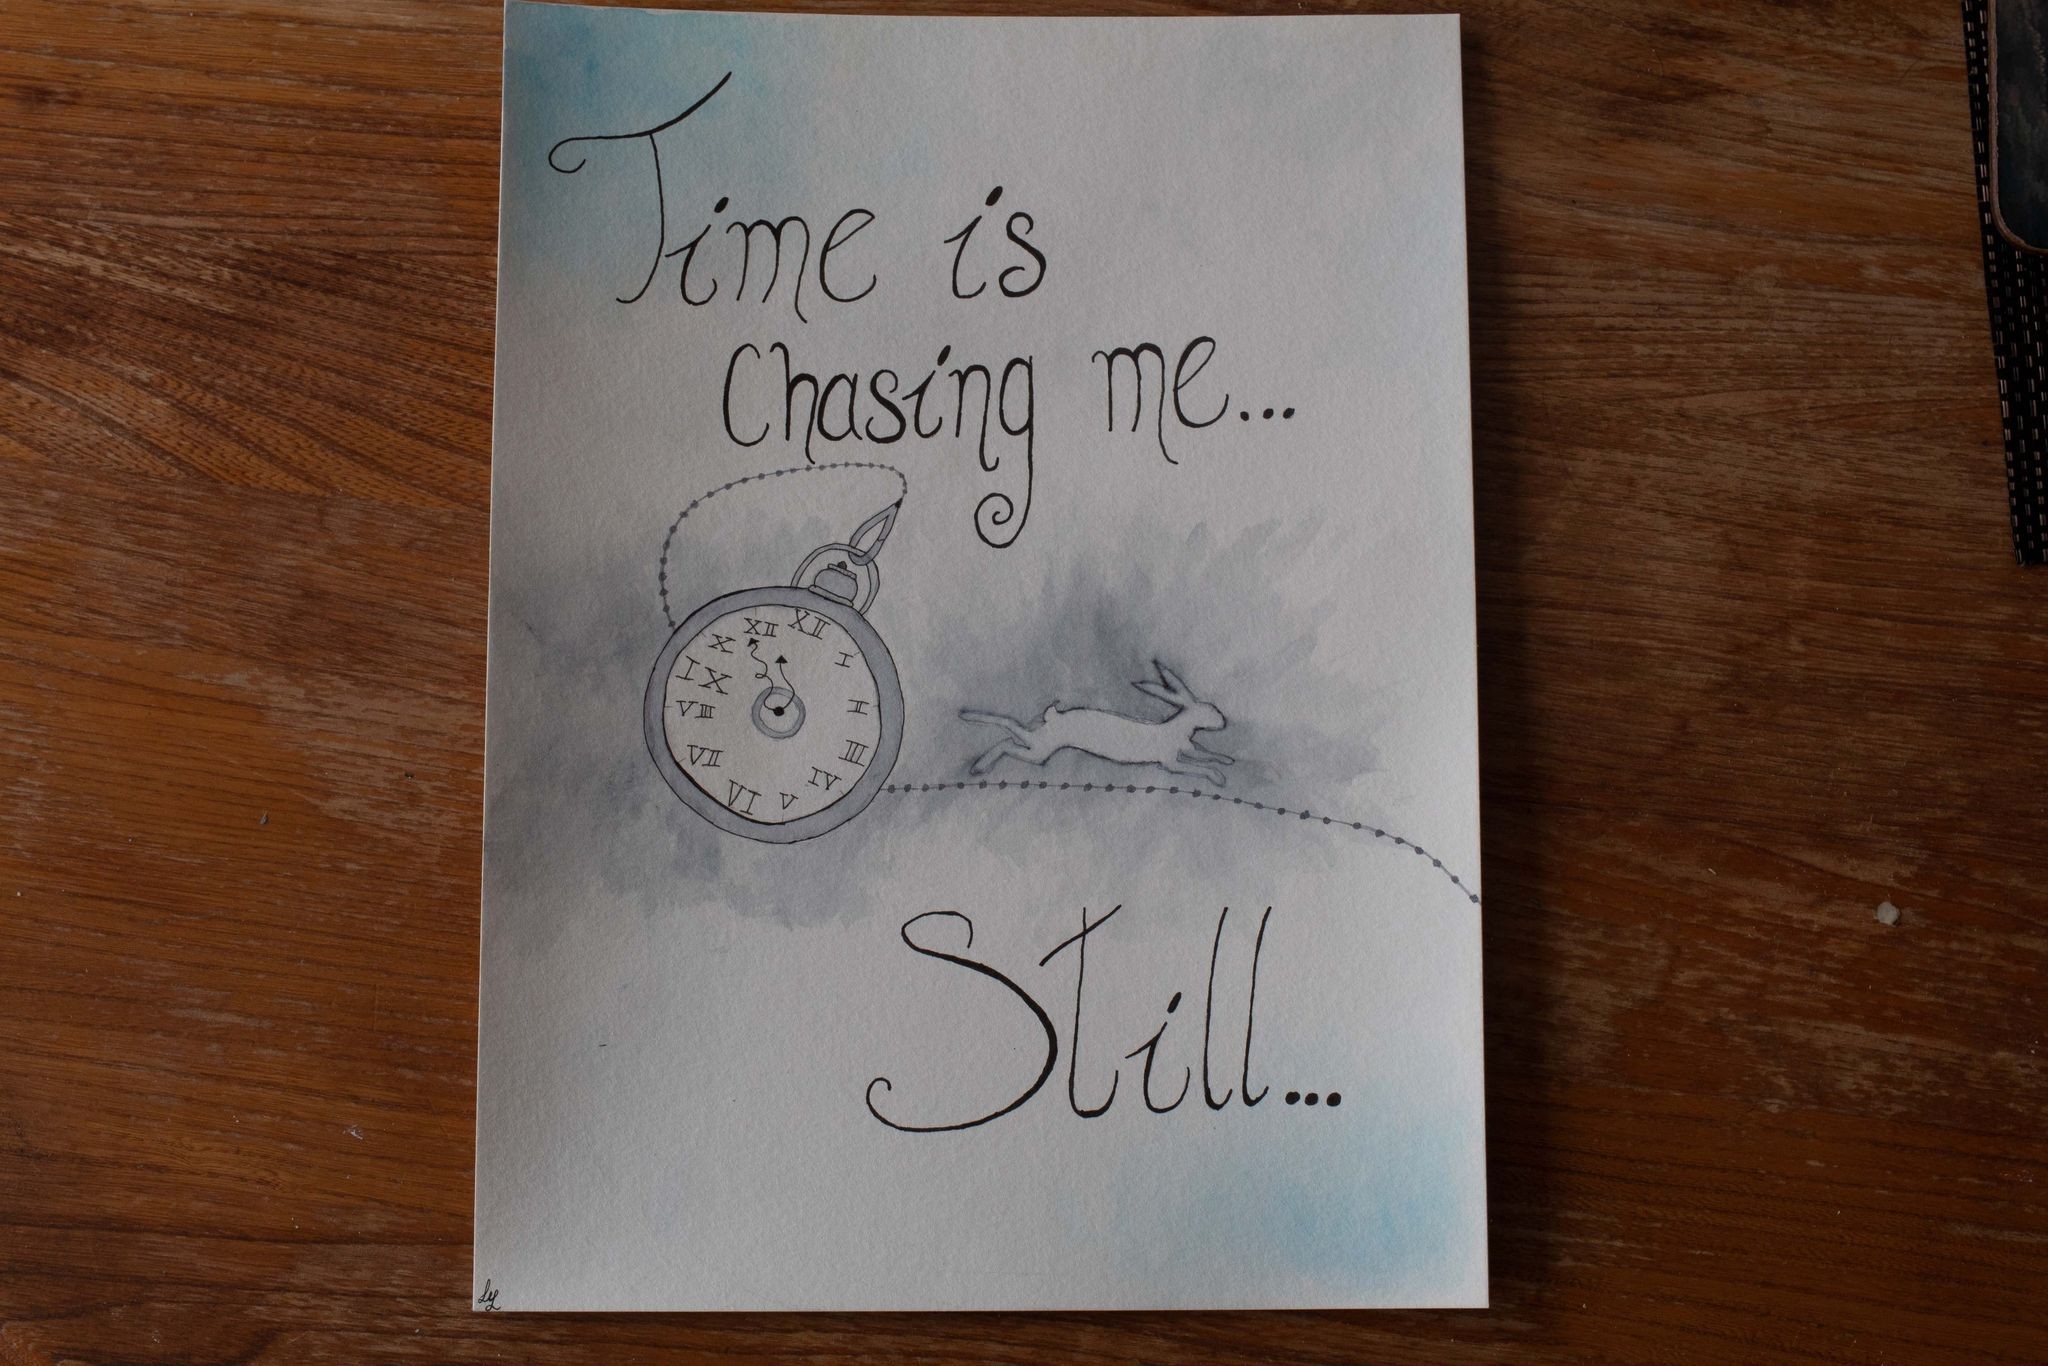 Product image of blue and white watercolour painting with white rabbit, pocket watch and text "Time is chasing me... Still", viewed closer up